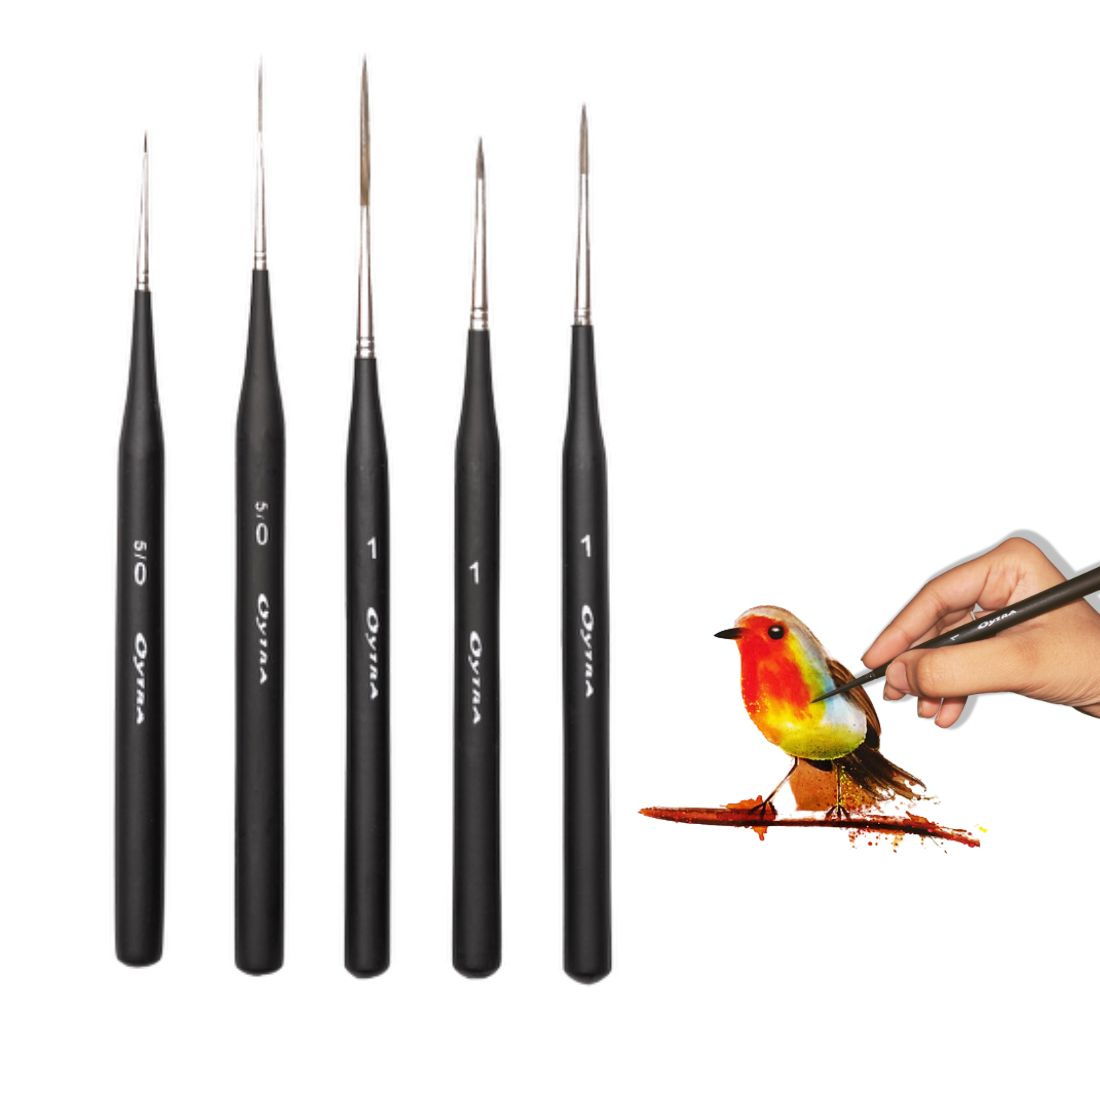  FUNOMOCYA 1 Set Watercolor Brush Painting Supplies Brush  paintbrushes Acrylic Paint Brush Oil Paint Artist Miniature Painting  Brushes Practical Paint Brushes top Coat Wood Sector Student